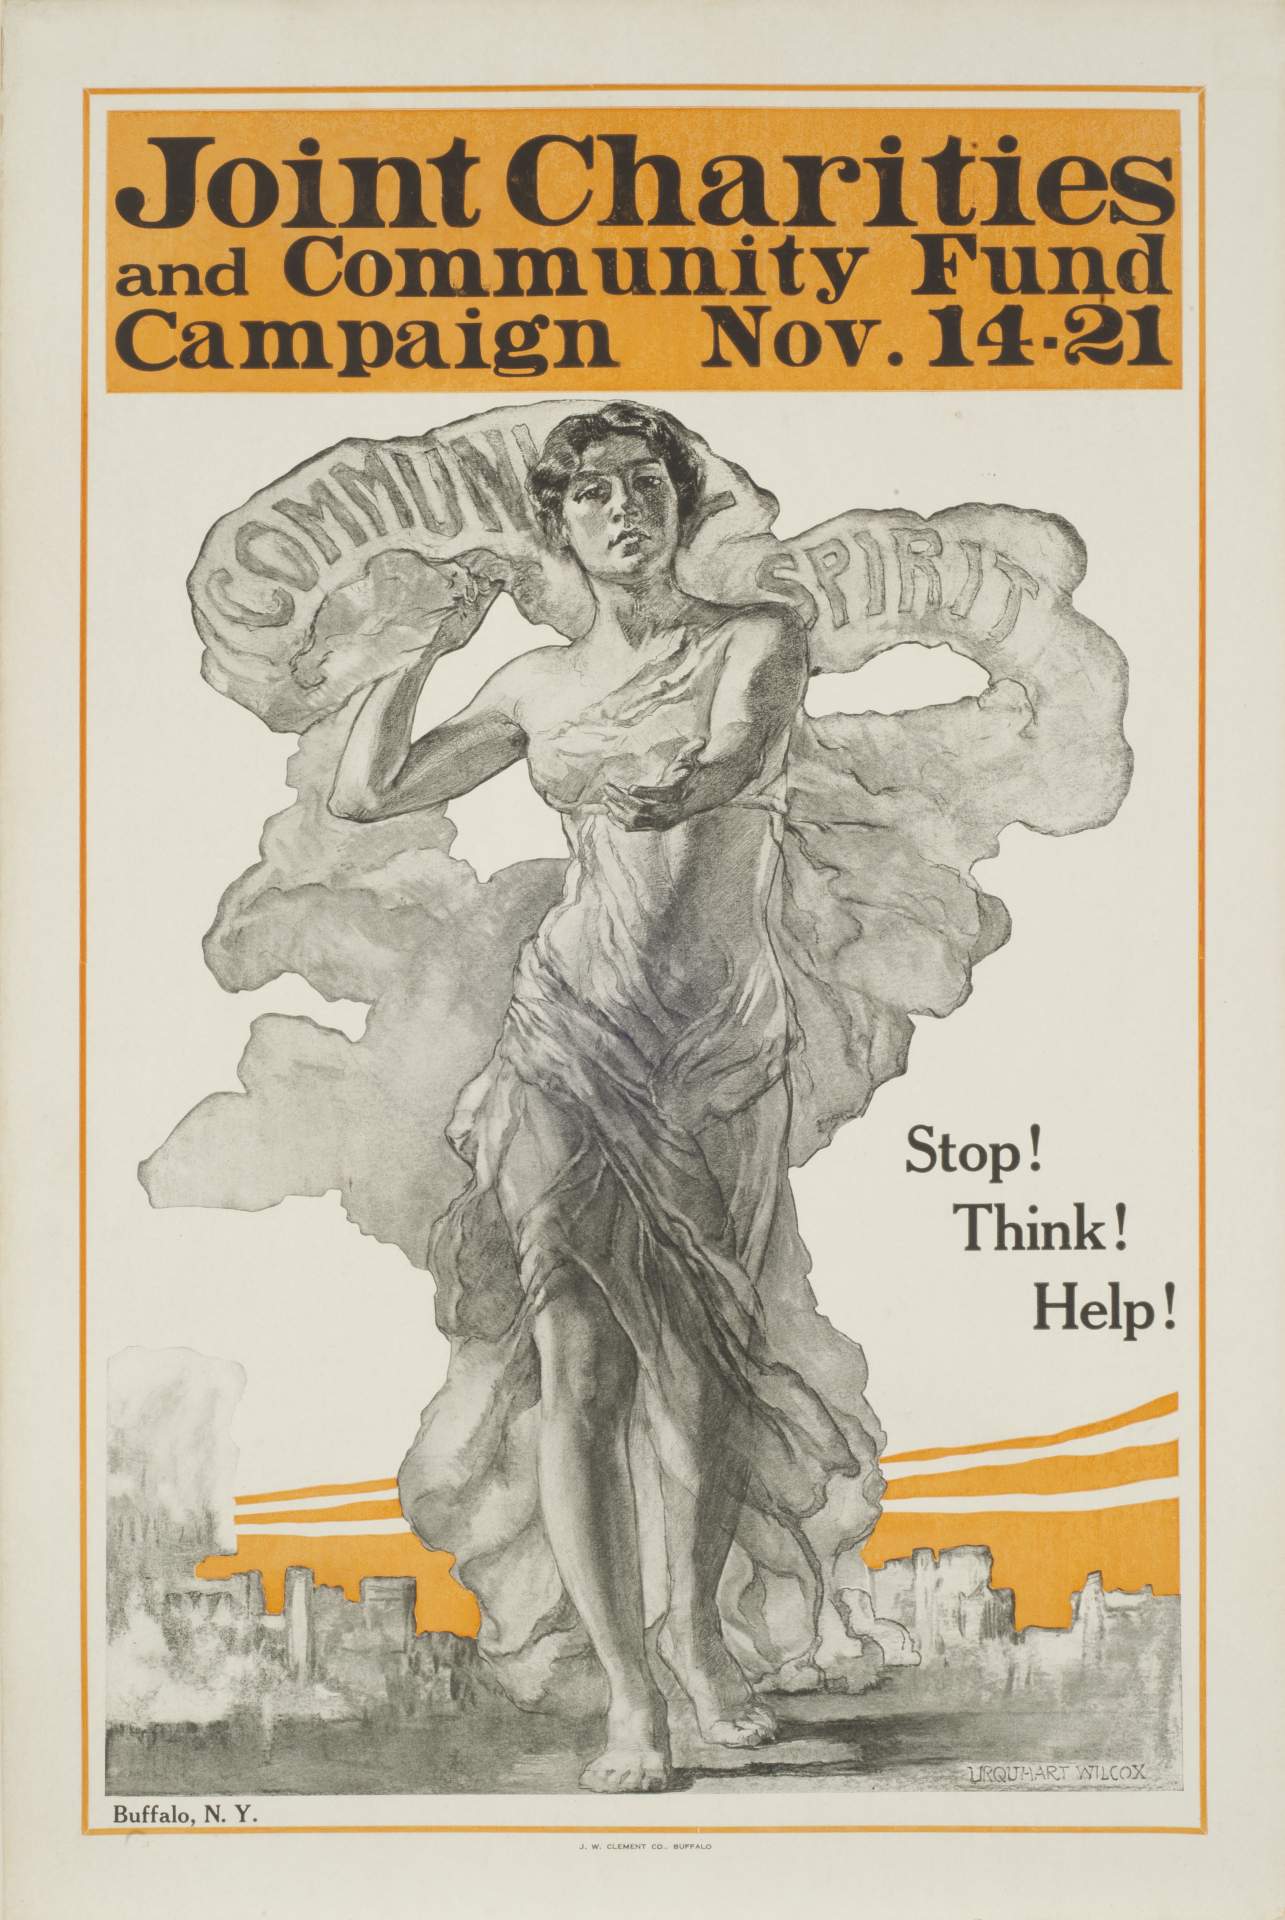 Poster for “Joint Charities and Community Fund Campaign